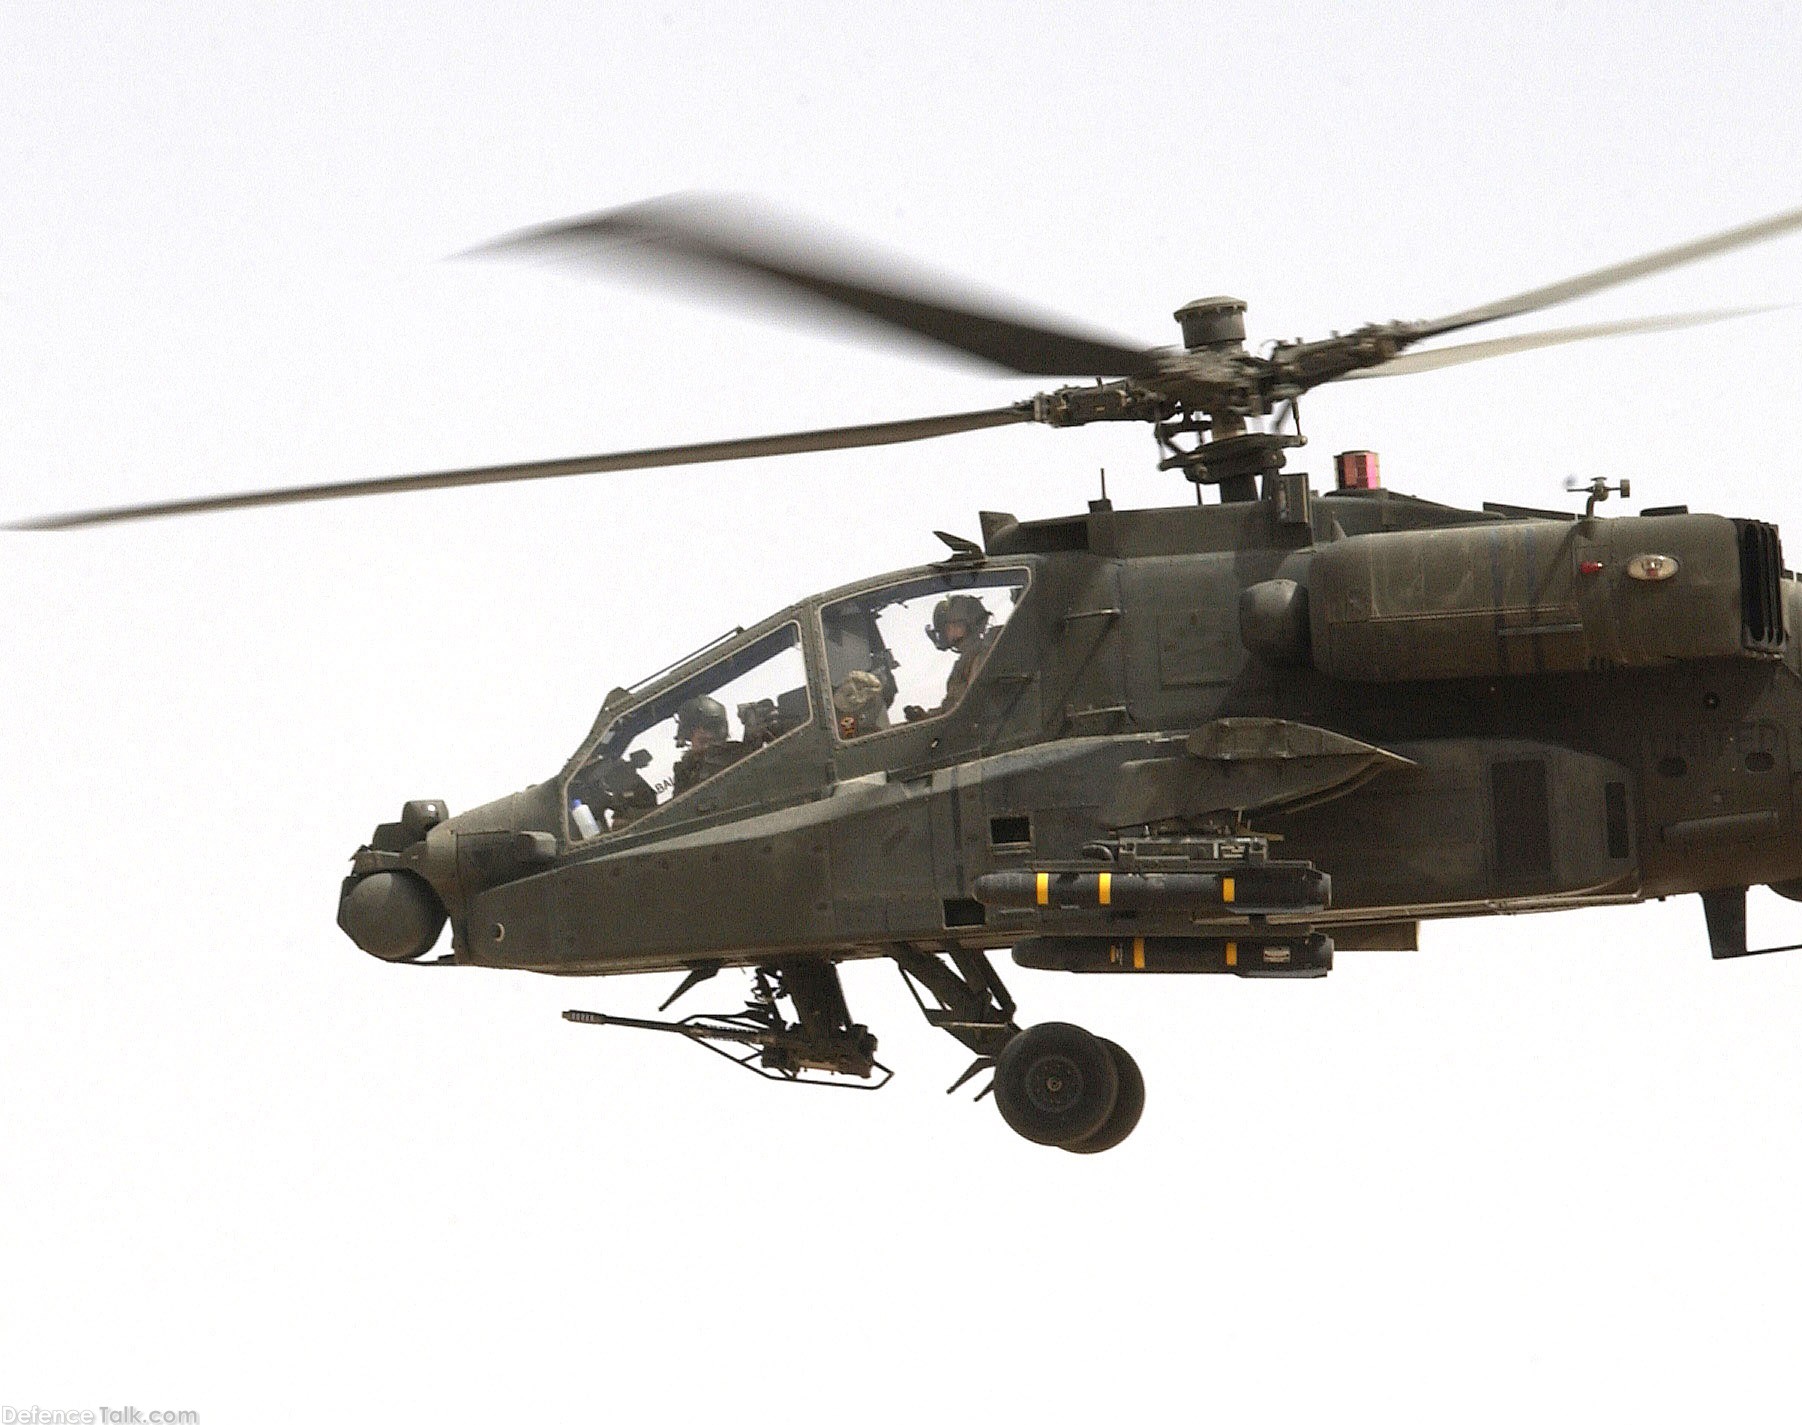 US Army AH-64 Apache Longbow Attack Helicopter